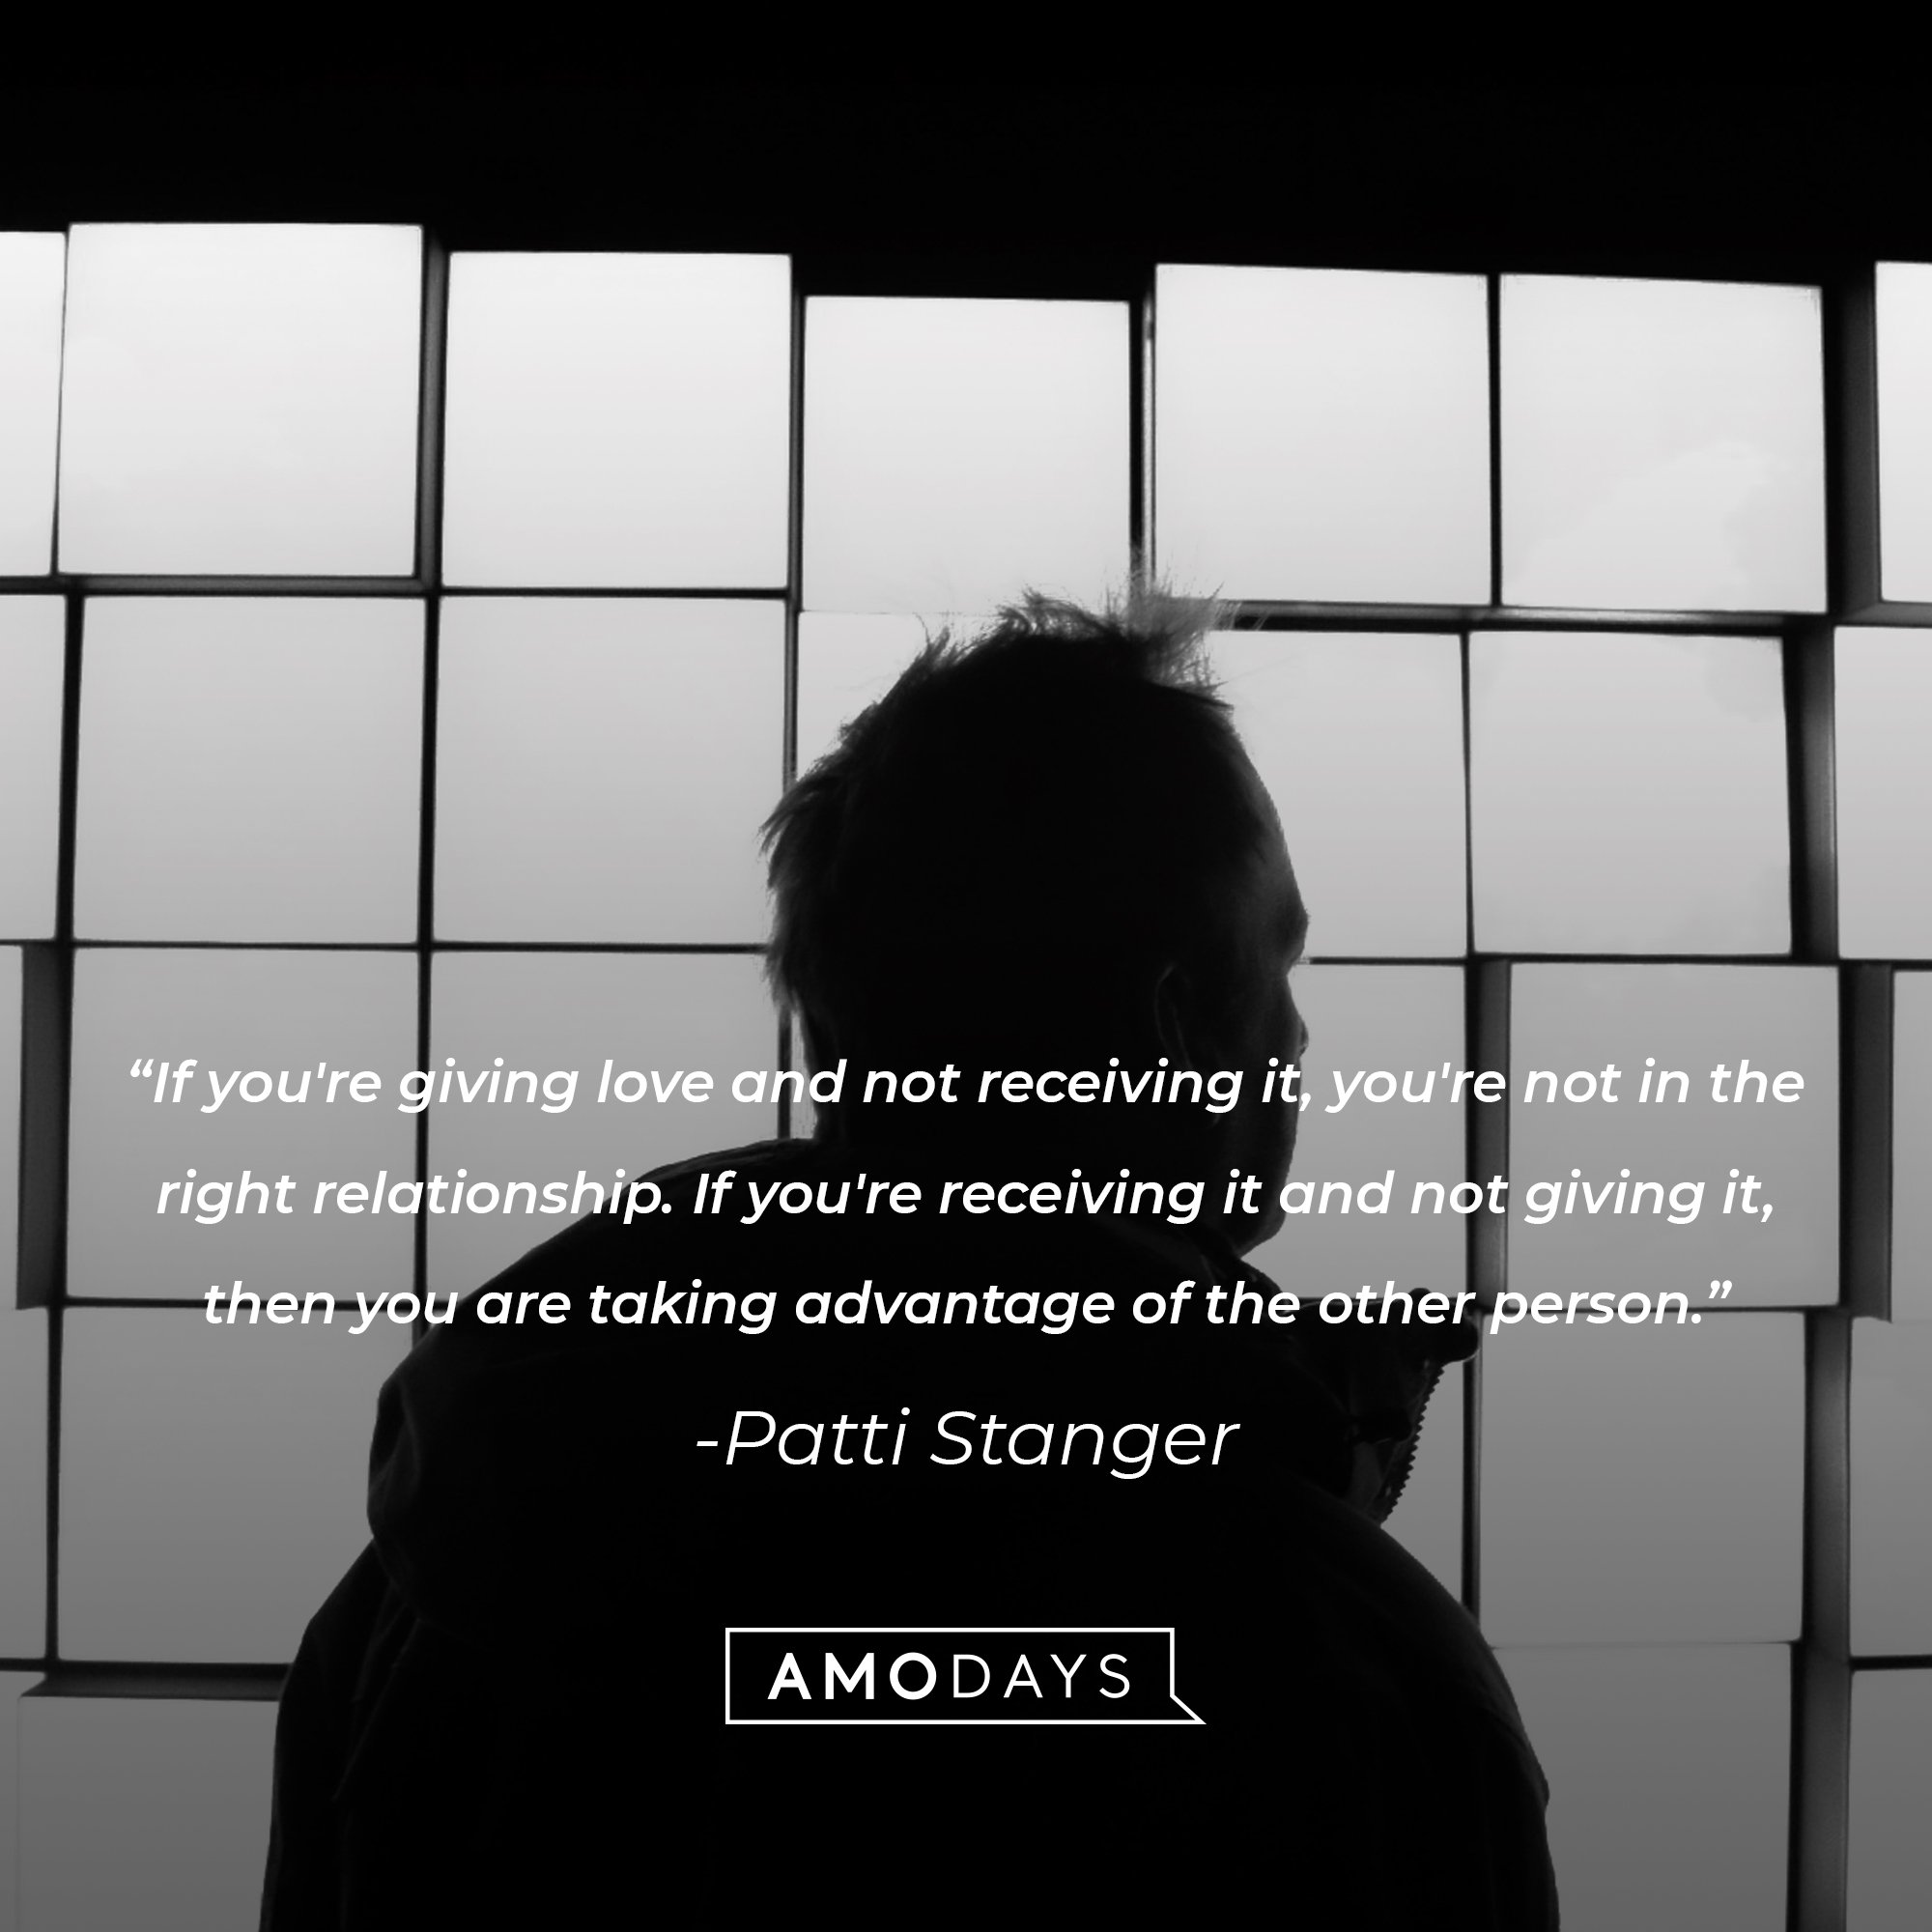  Patti Stanger’s quote: "If you're giving love and not receiving it, you're not in the right relationship. If you're receiving it and not giving it, then you are taking advantage of the other person." | Image: AmoDays